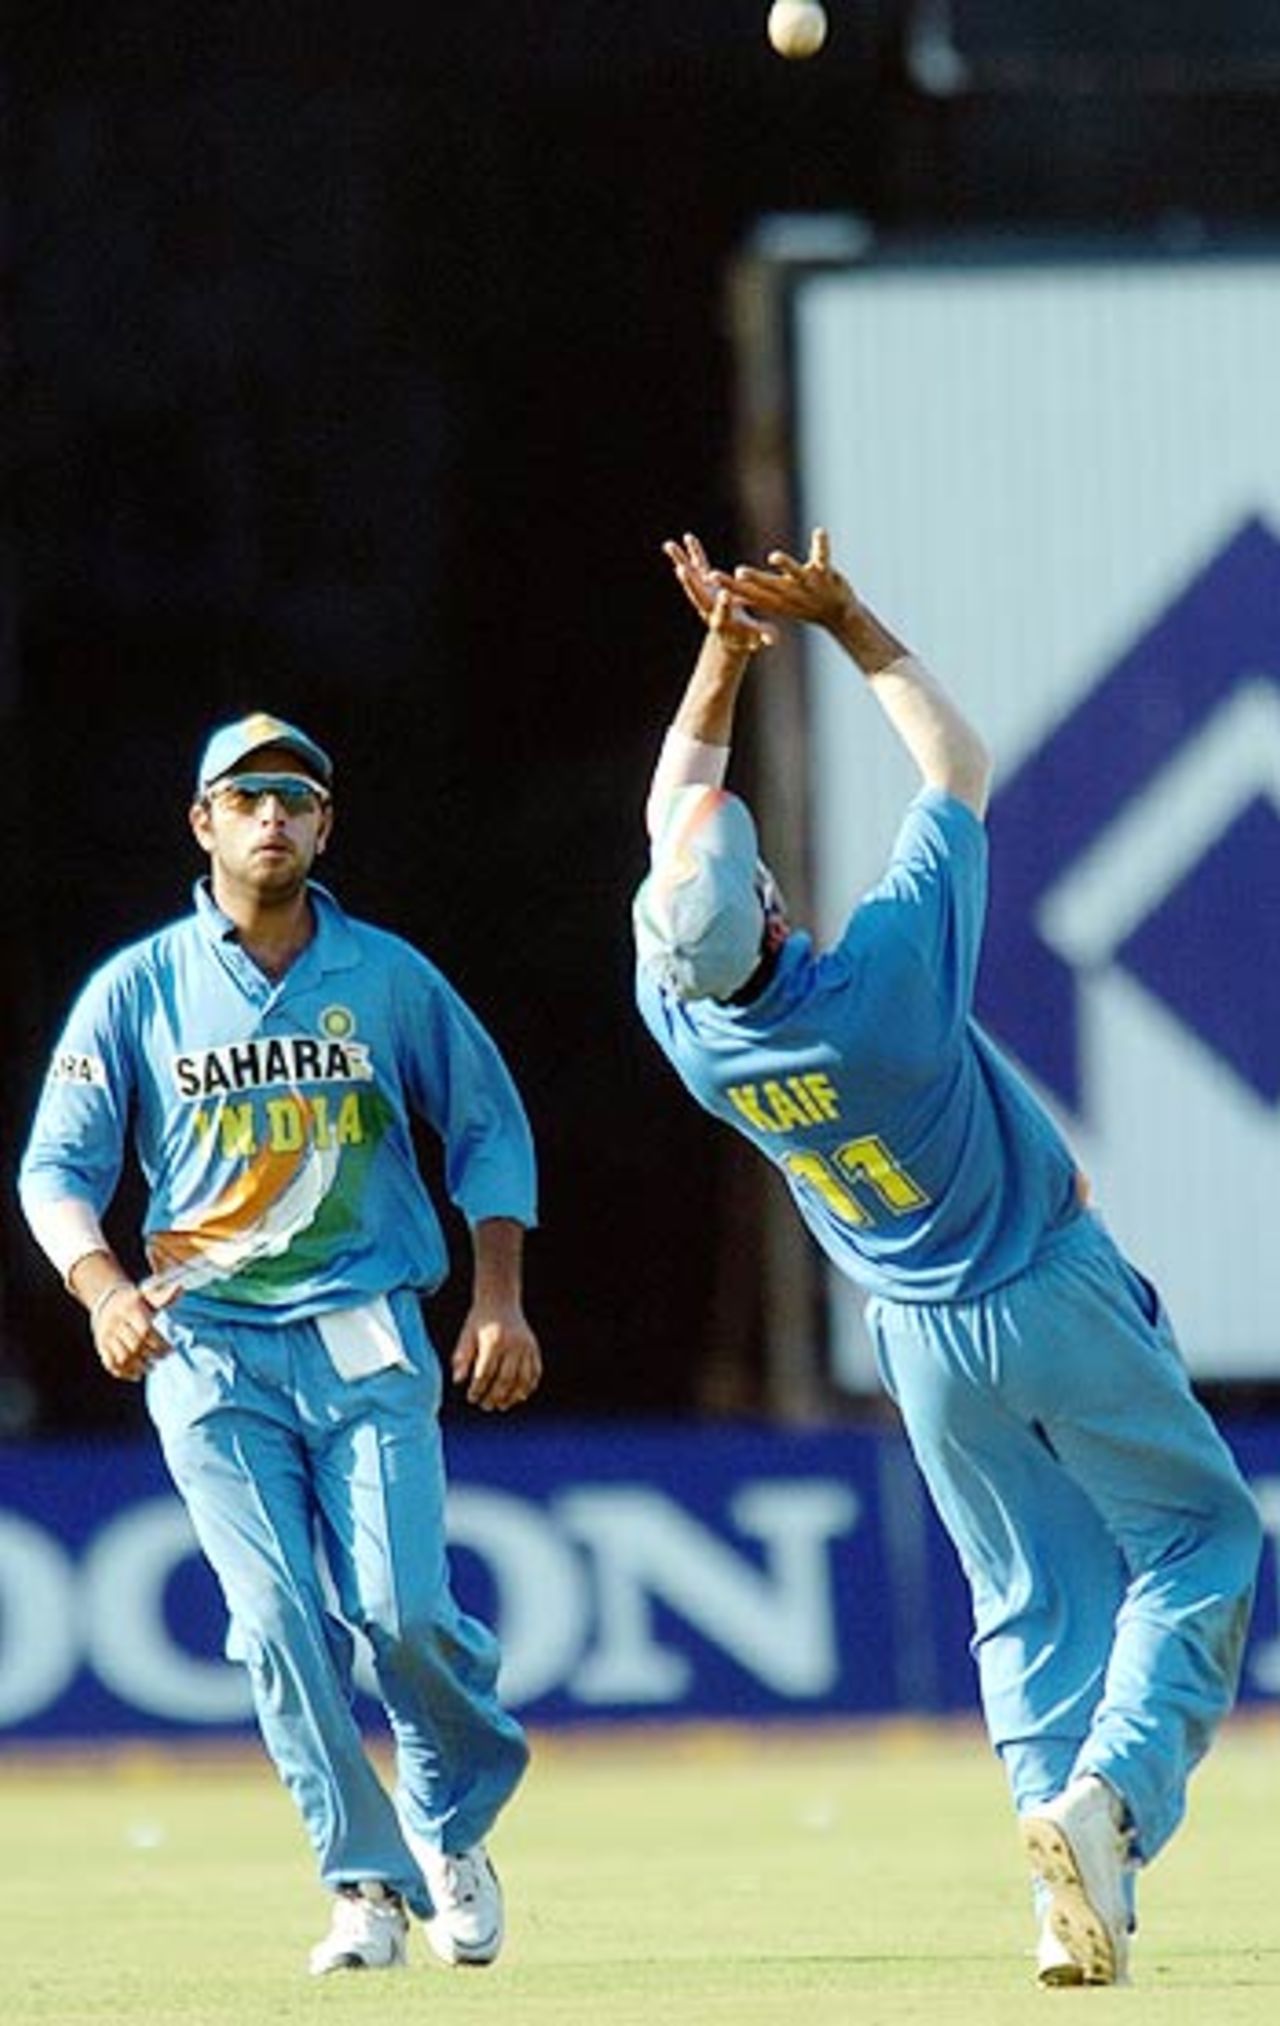 Mohammad Kaif held on to the catch to get rid of Yousuf Youhana for 71, India v Pakistan, 2nd ODI, Visakhapatnam, April 5, 2005